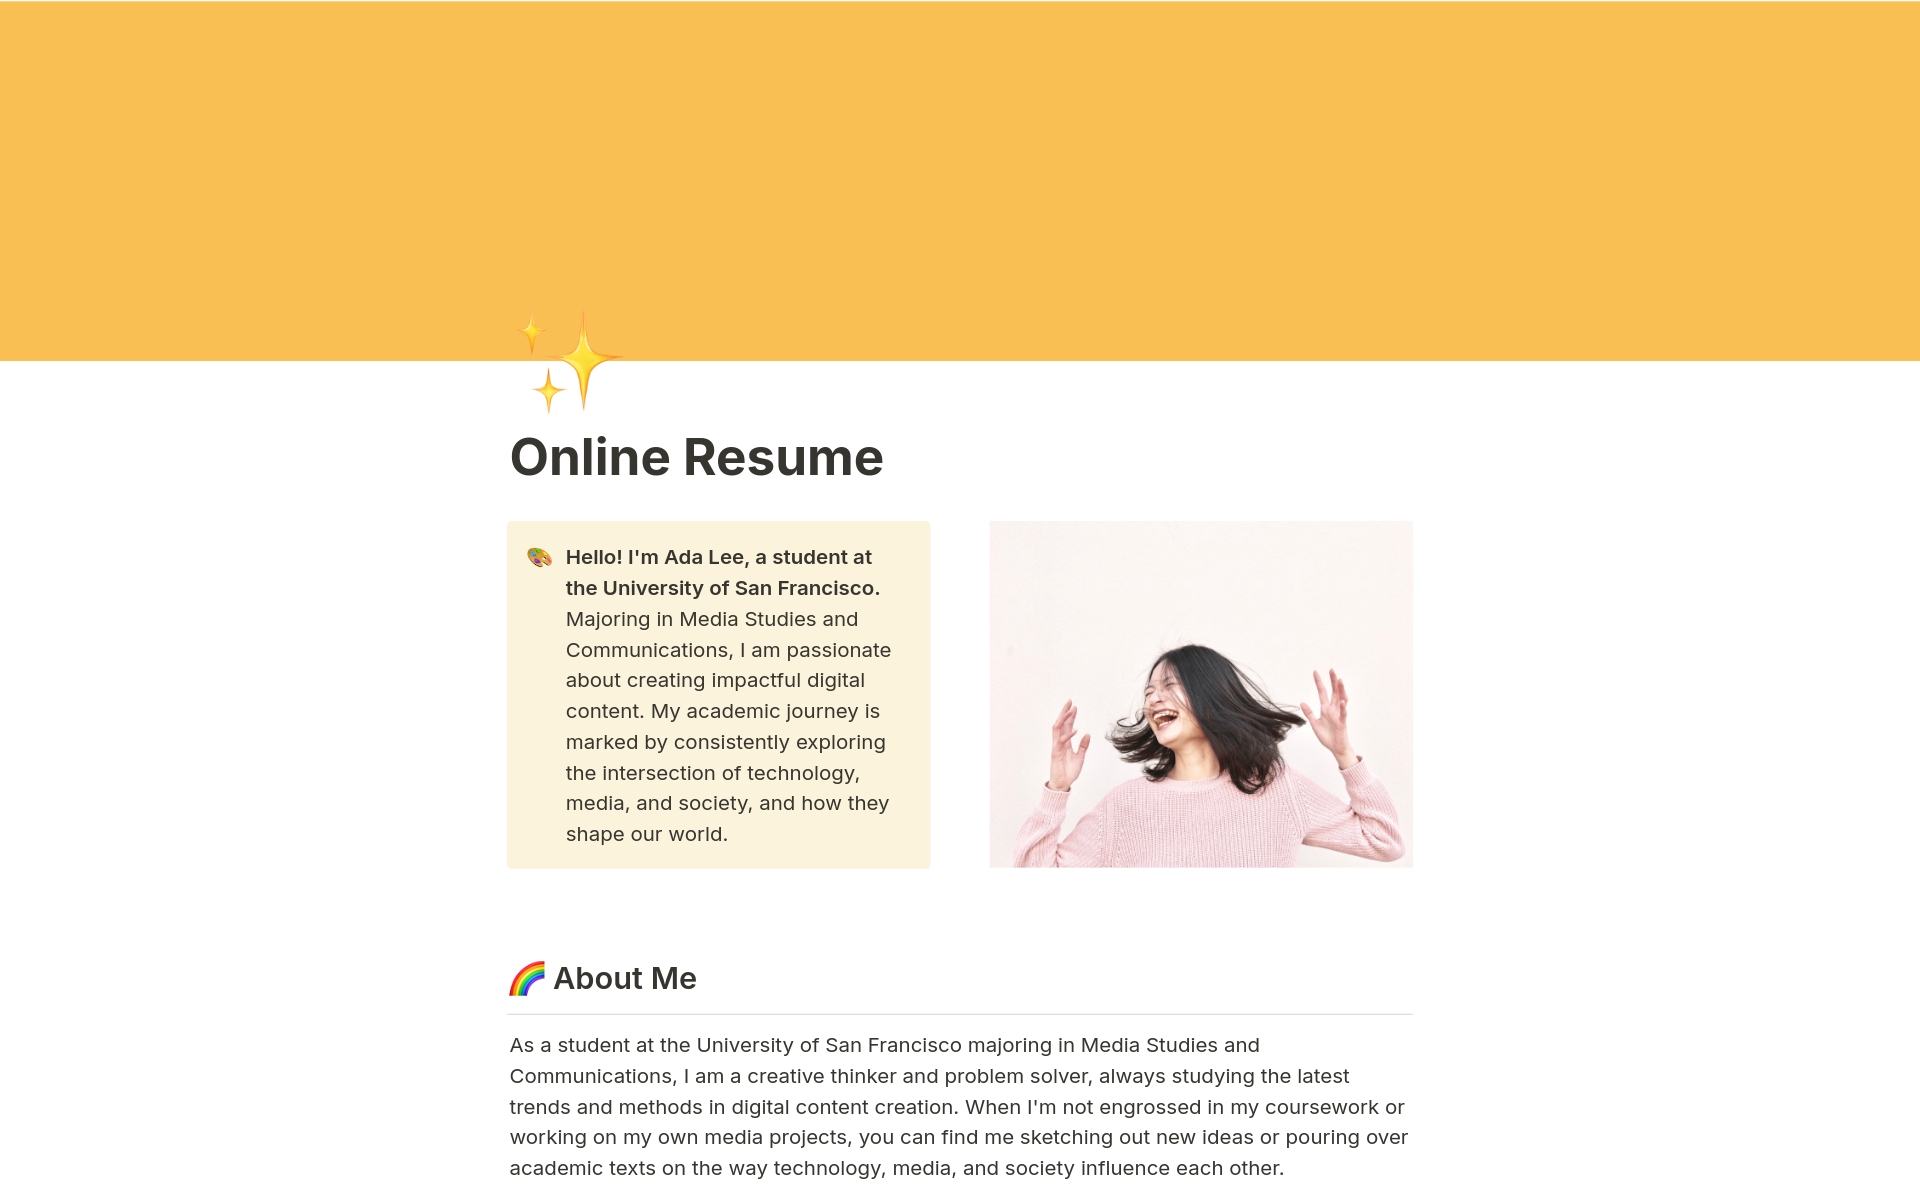 Screenshot of Top 10 Free Career Development Templates in Notion collection by Notion